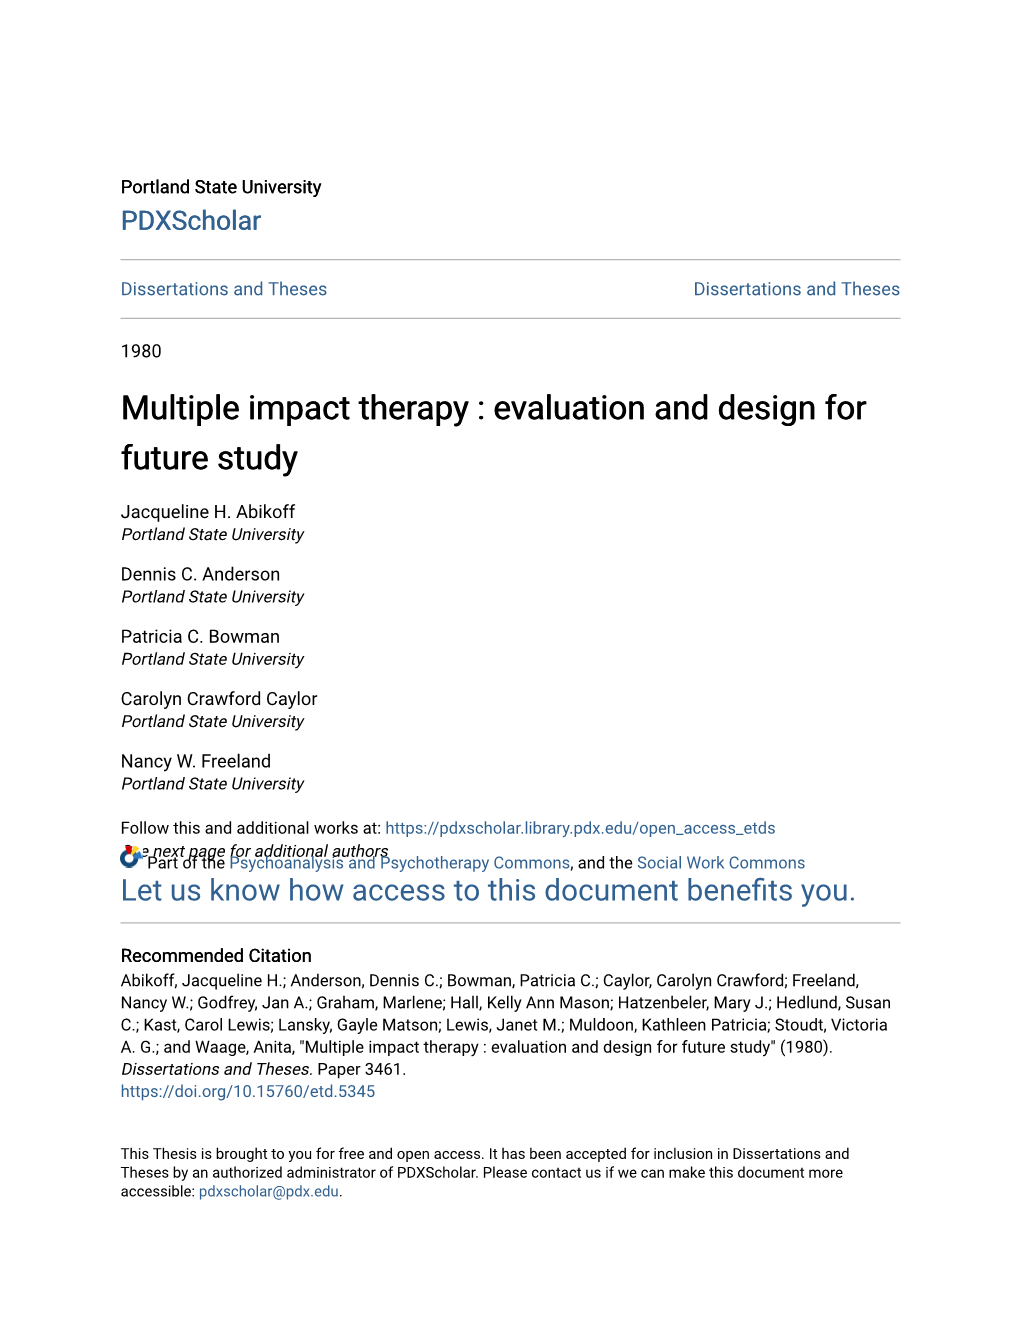 Multiple Impact Therapy : Evaluation and Design for Future Study